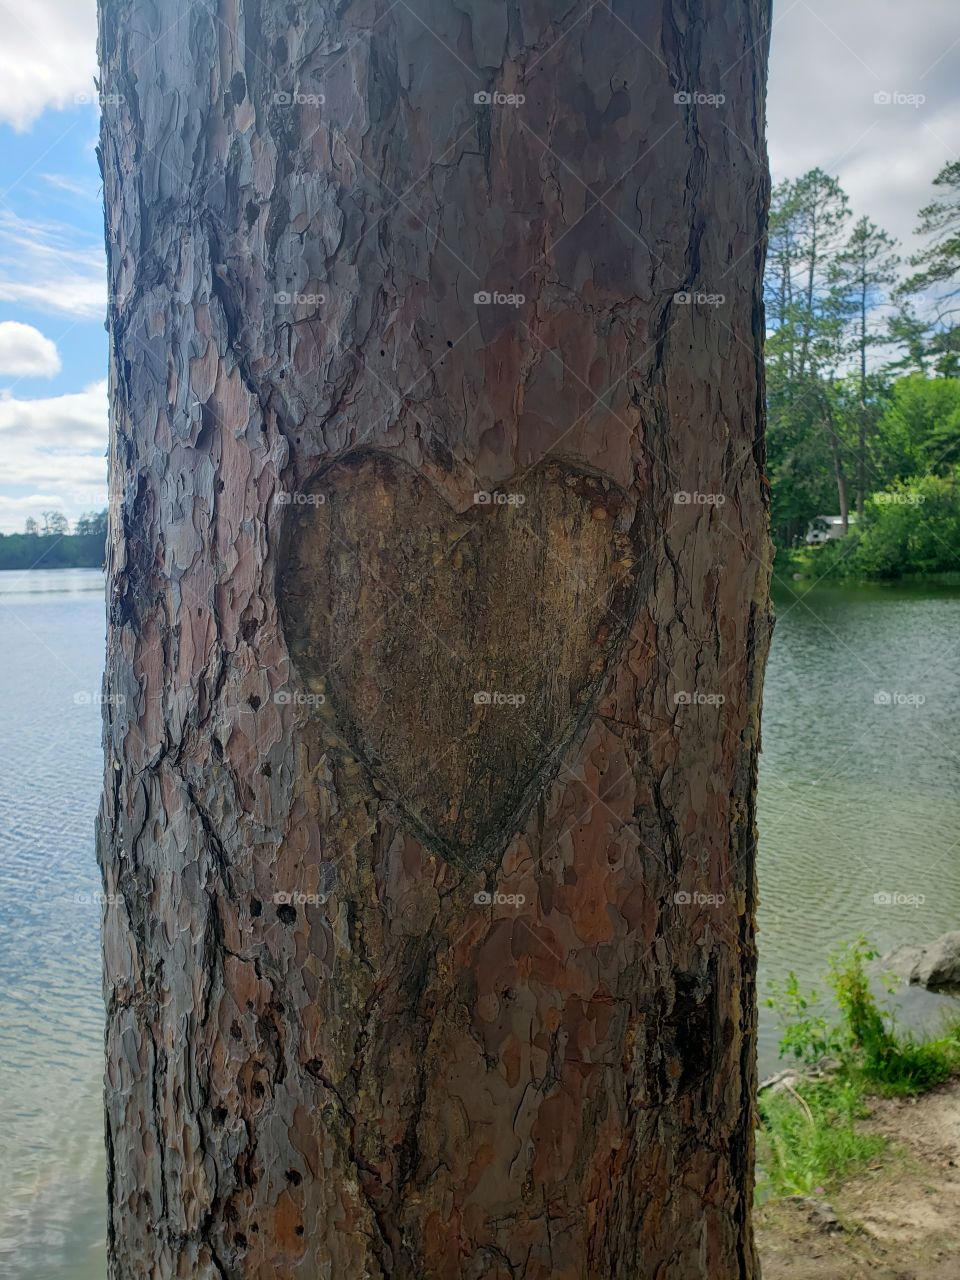 carved heart in a tree.